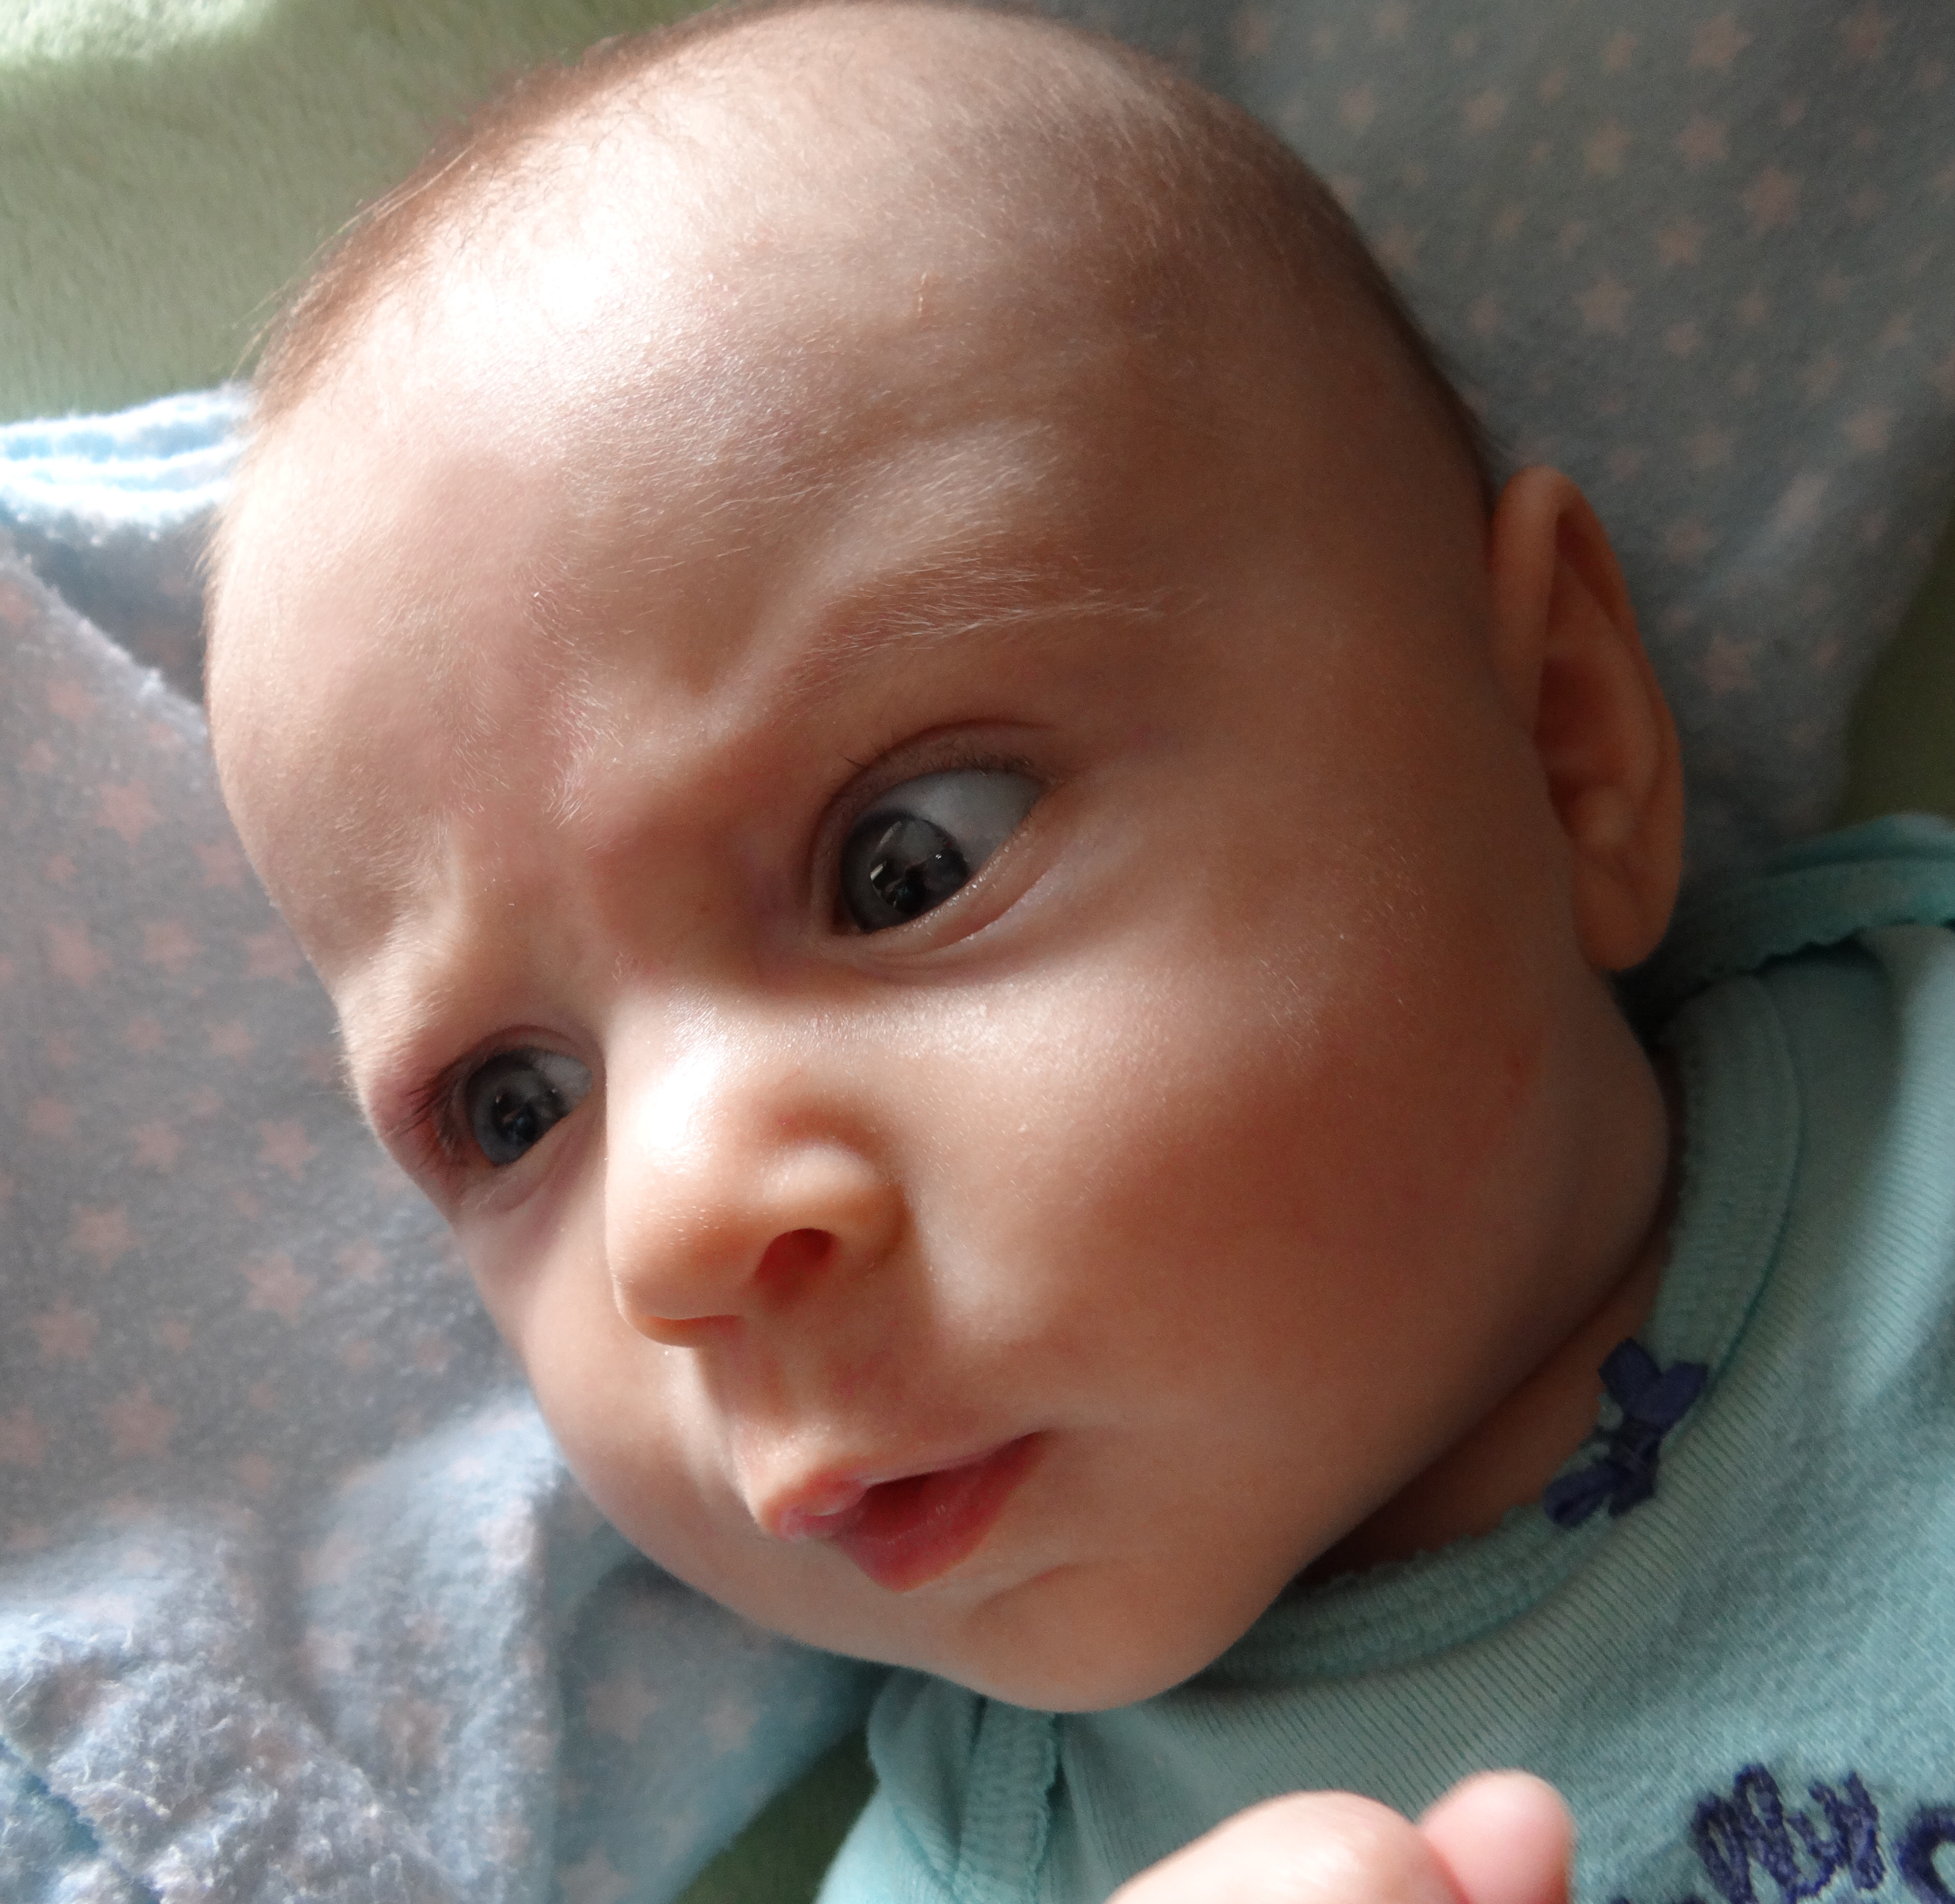 Baby with a quizzical facial expression